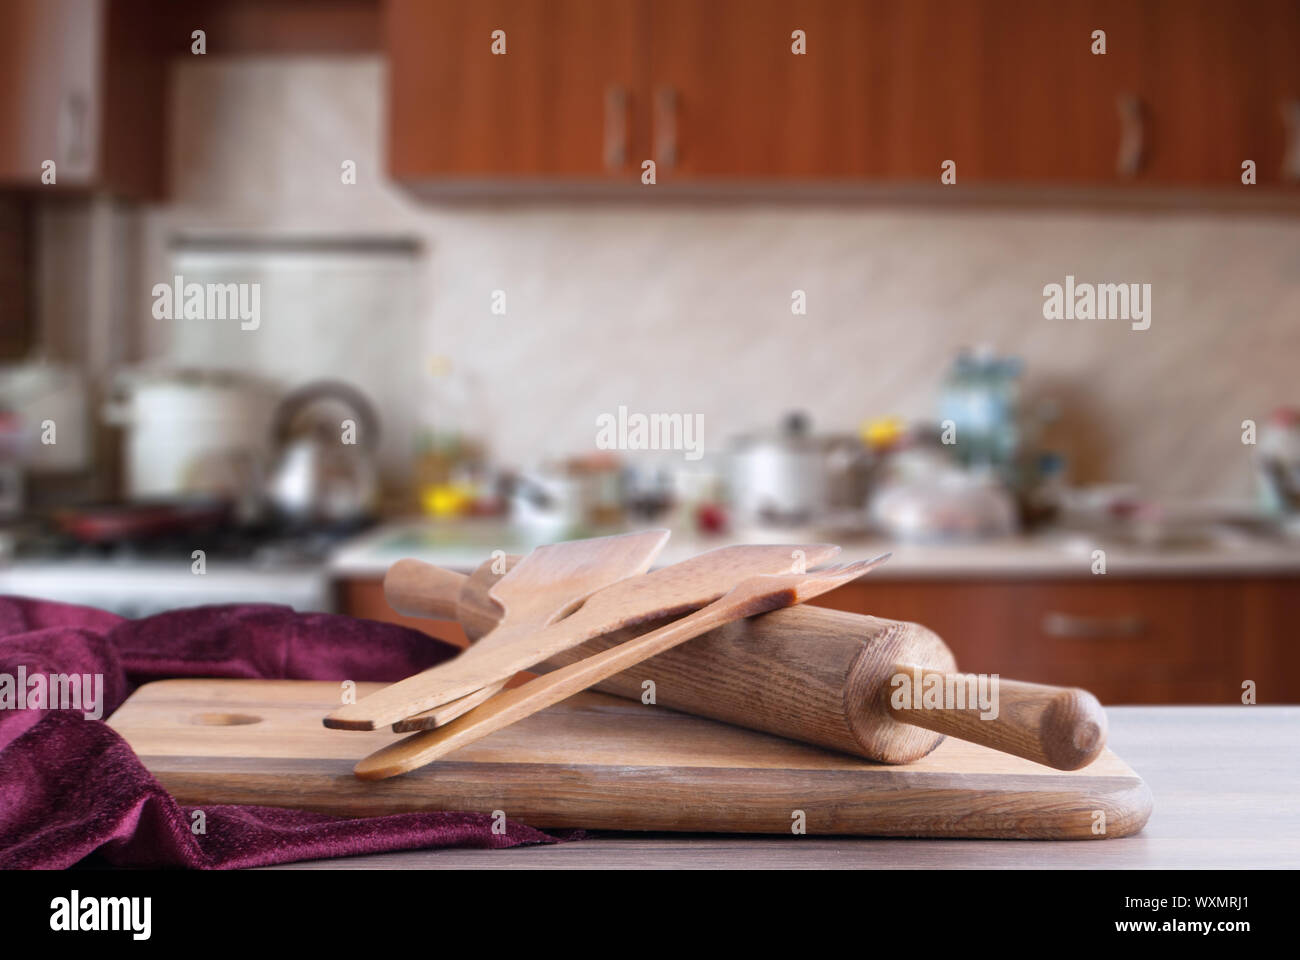 wooden surface and inventory on the background of the kitchen Stock Photo